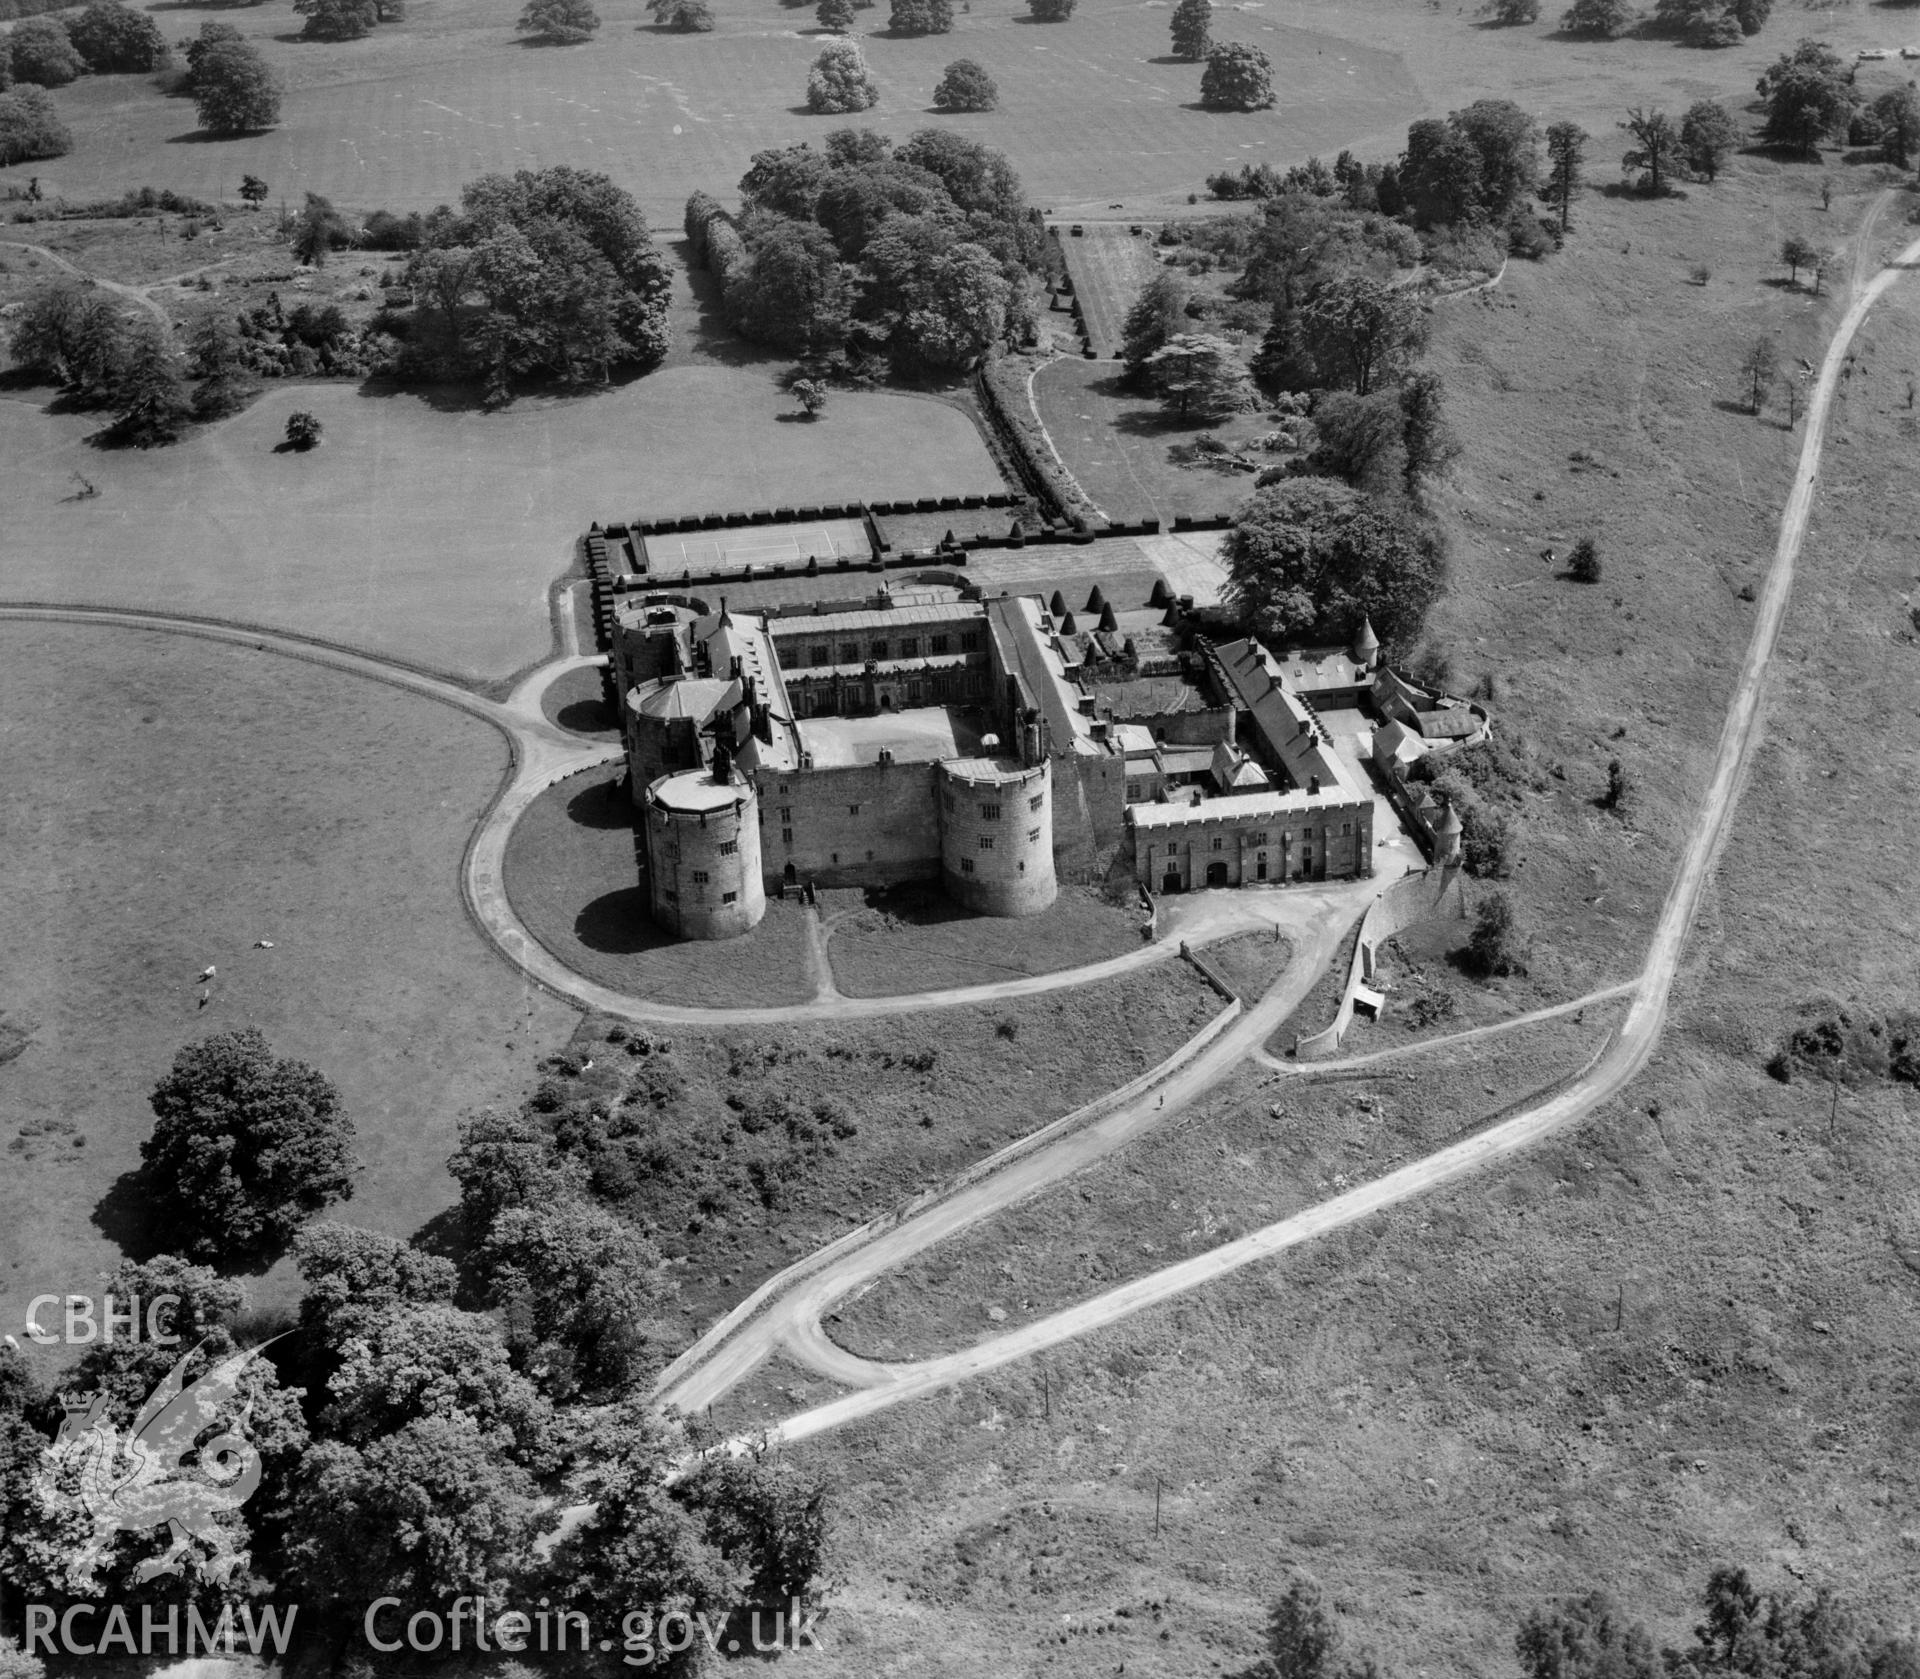 View of Chirk castle